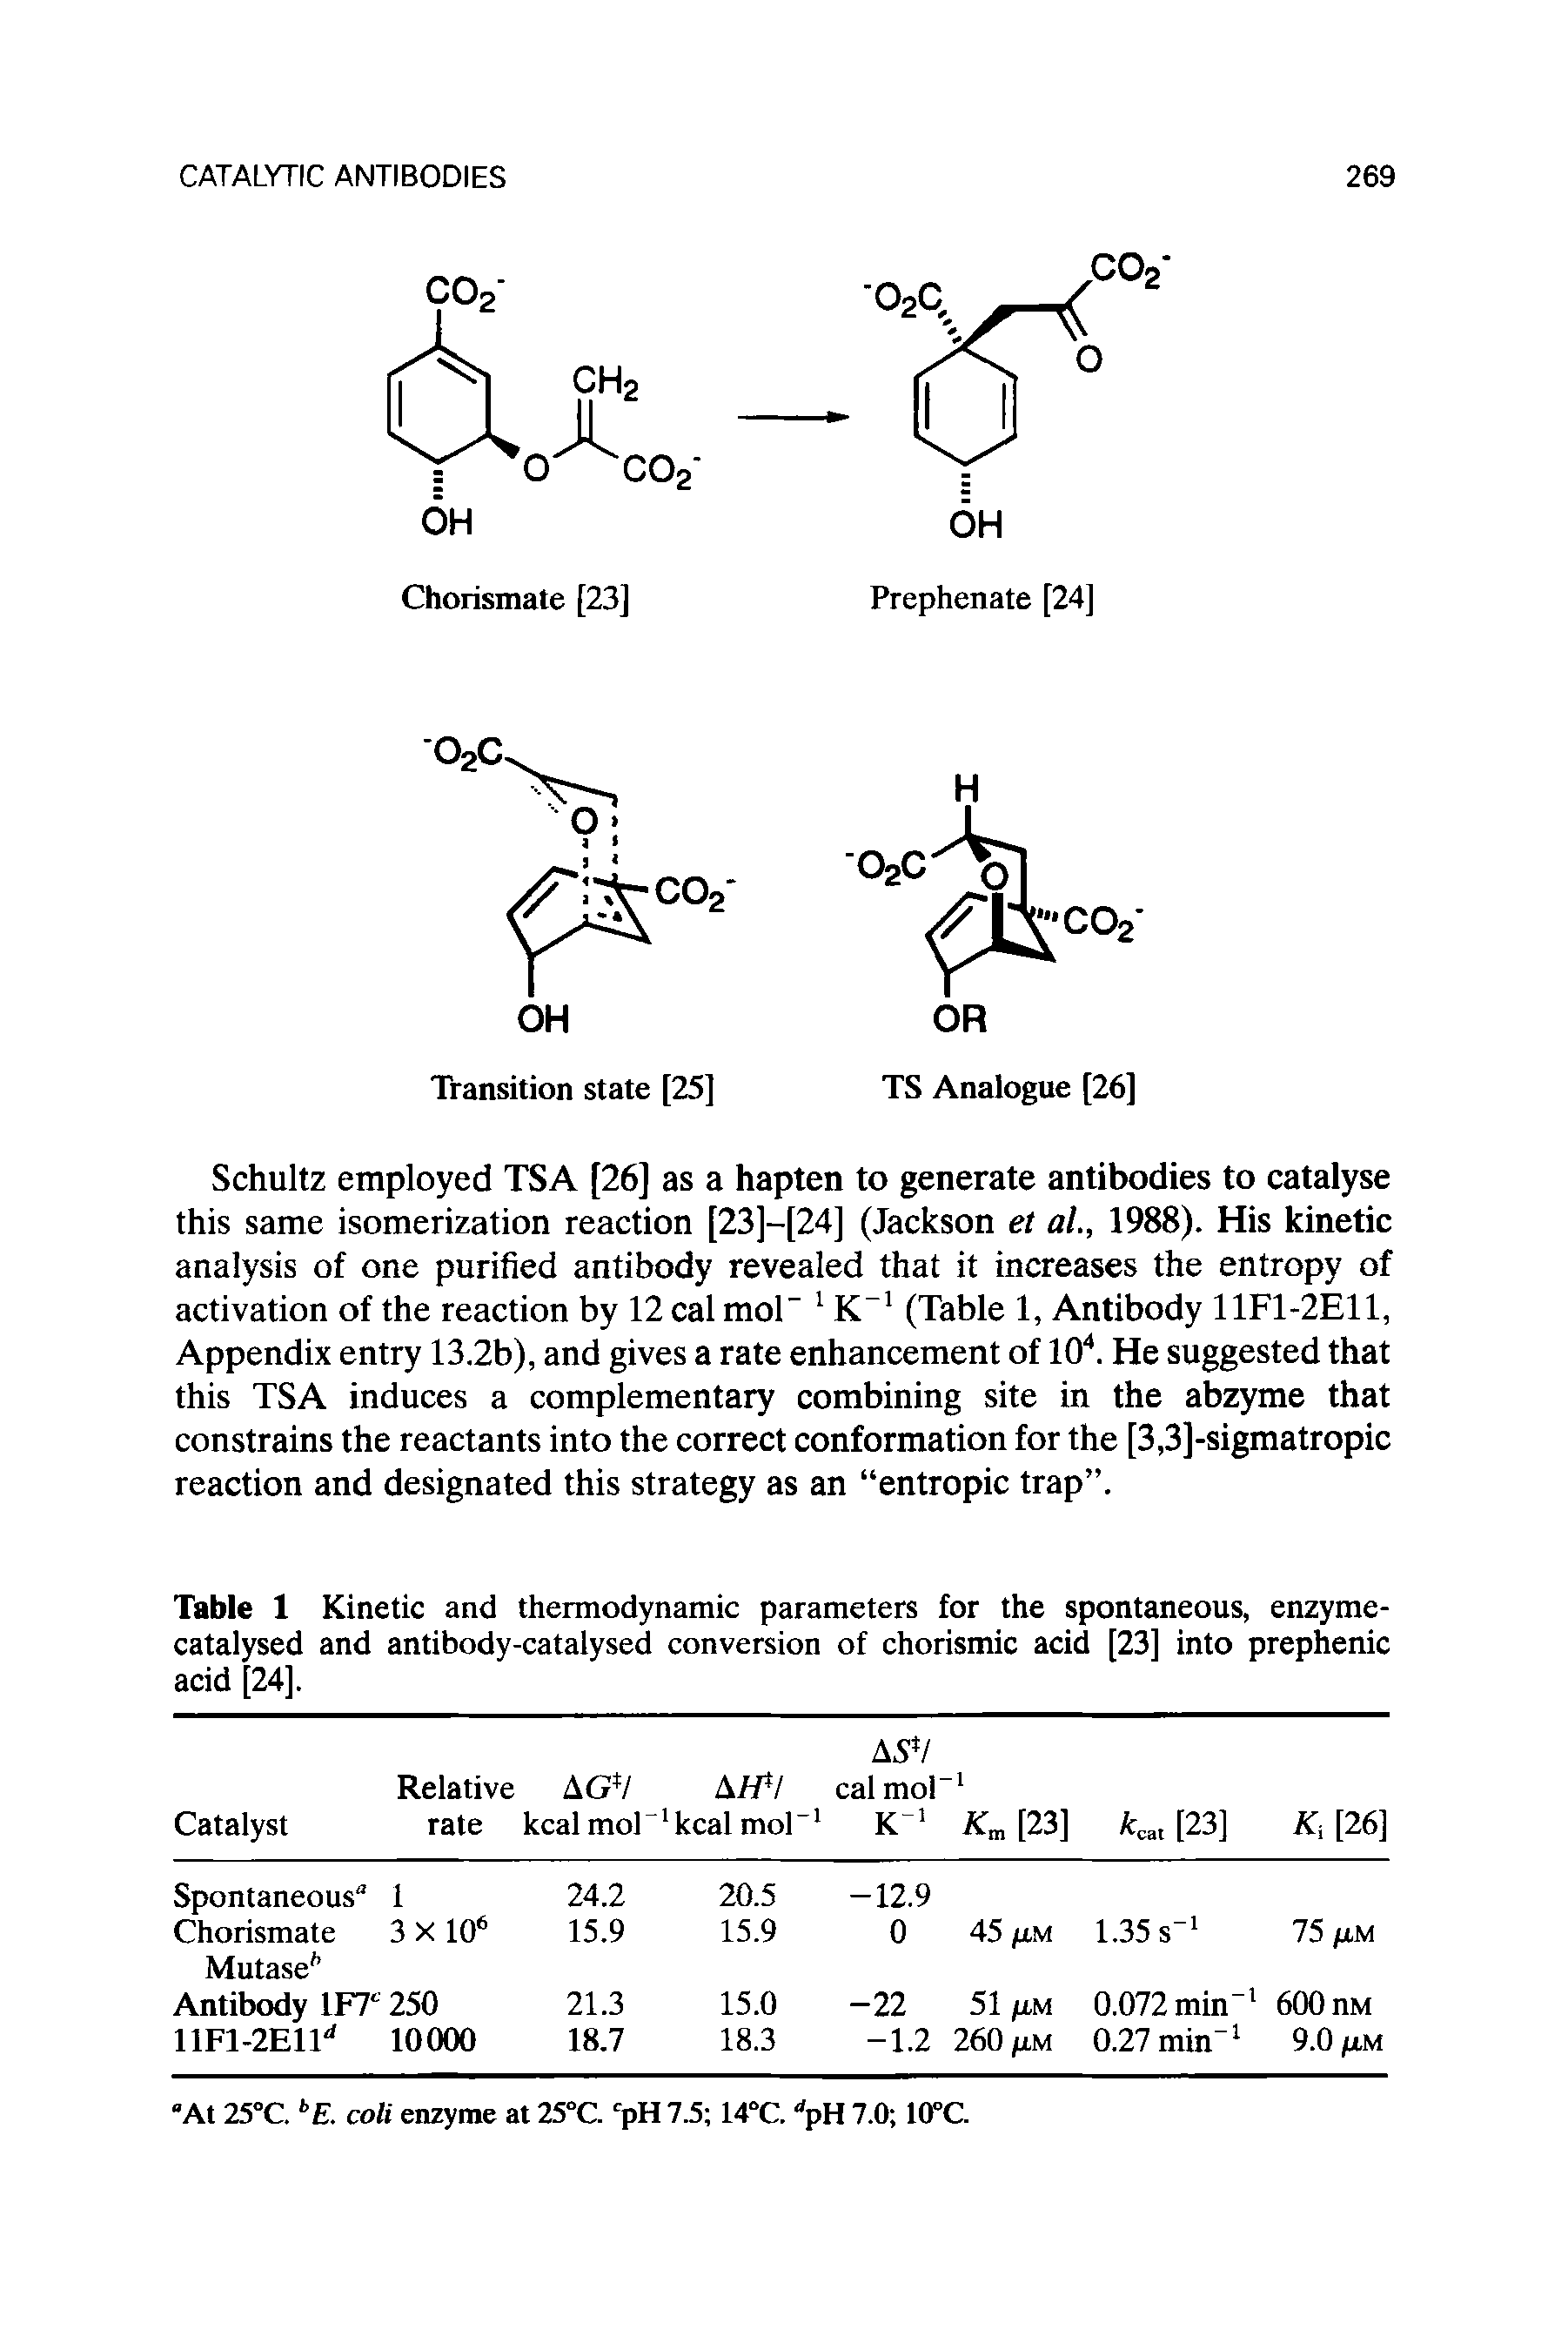 Table 1 Kinetic and thermodynamic parameters for the spontaneous, enzyme-catalysed and antibody-catalysed conversion of chorismic acid [23] into prephenic acid [24],...